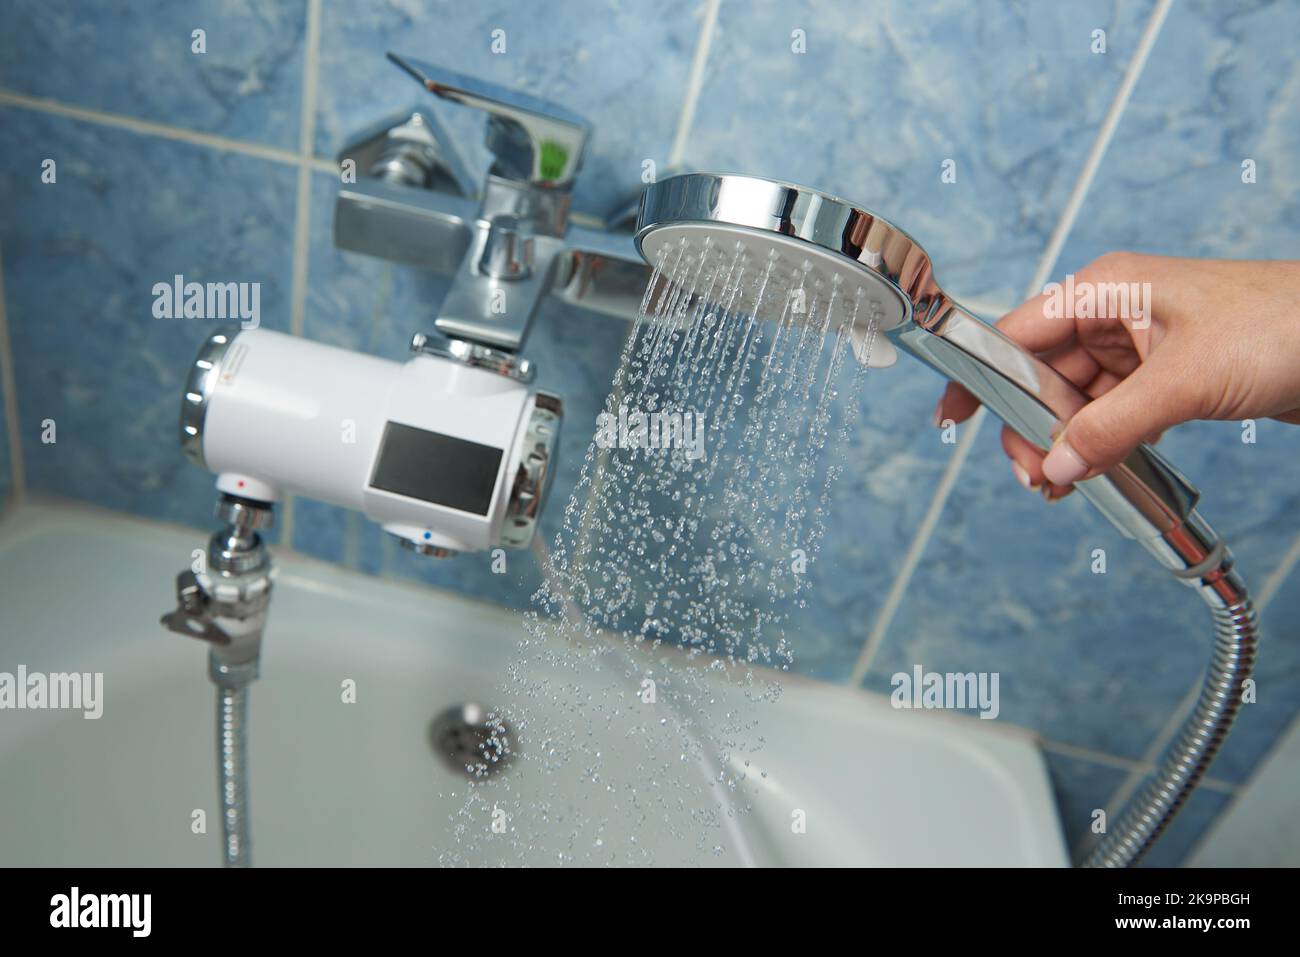 Shower with electric water heater in the bathroom. Stock Photo